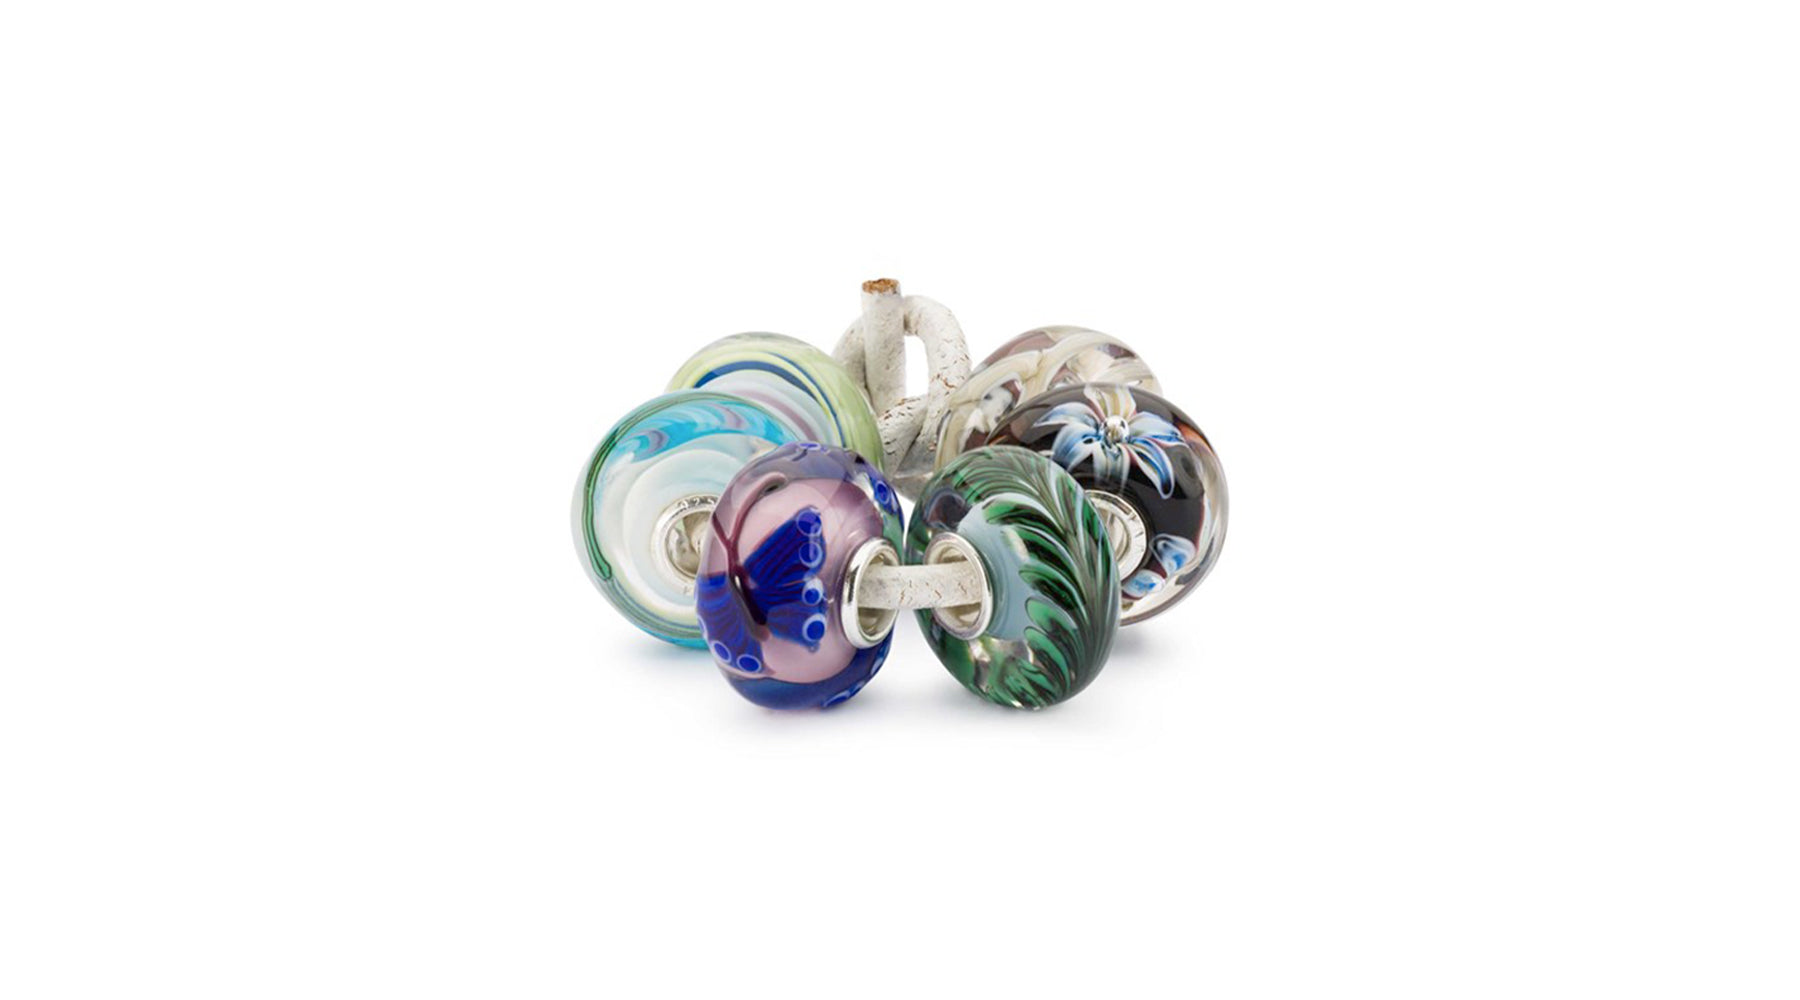 TROLLBEADS - THE POWERS OF NATURE